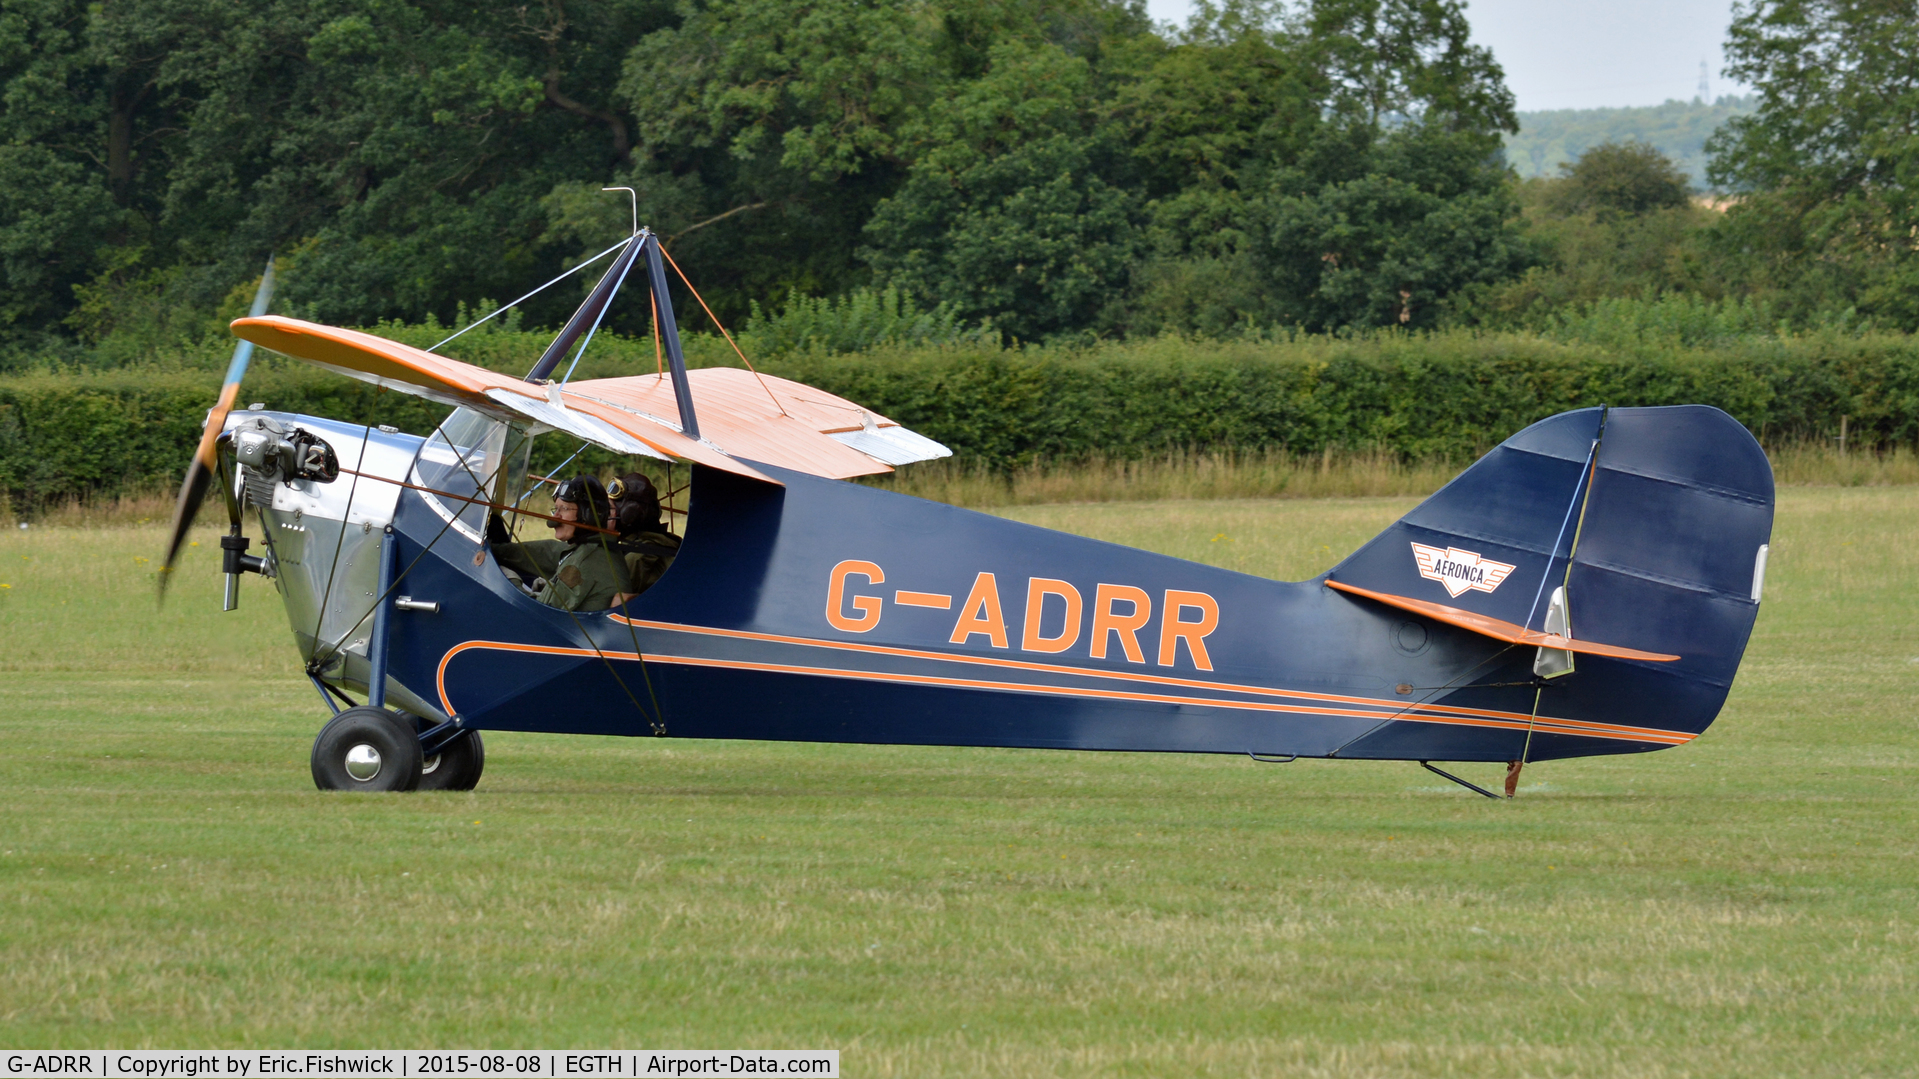 G-ADRR, 1936 Aeronca C-3 Collegian C/N A-734, 1. G-ADRR at The Shuttleworth Collection, Old Warden, Bedfordshire.